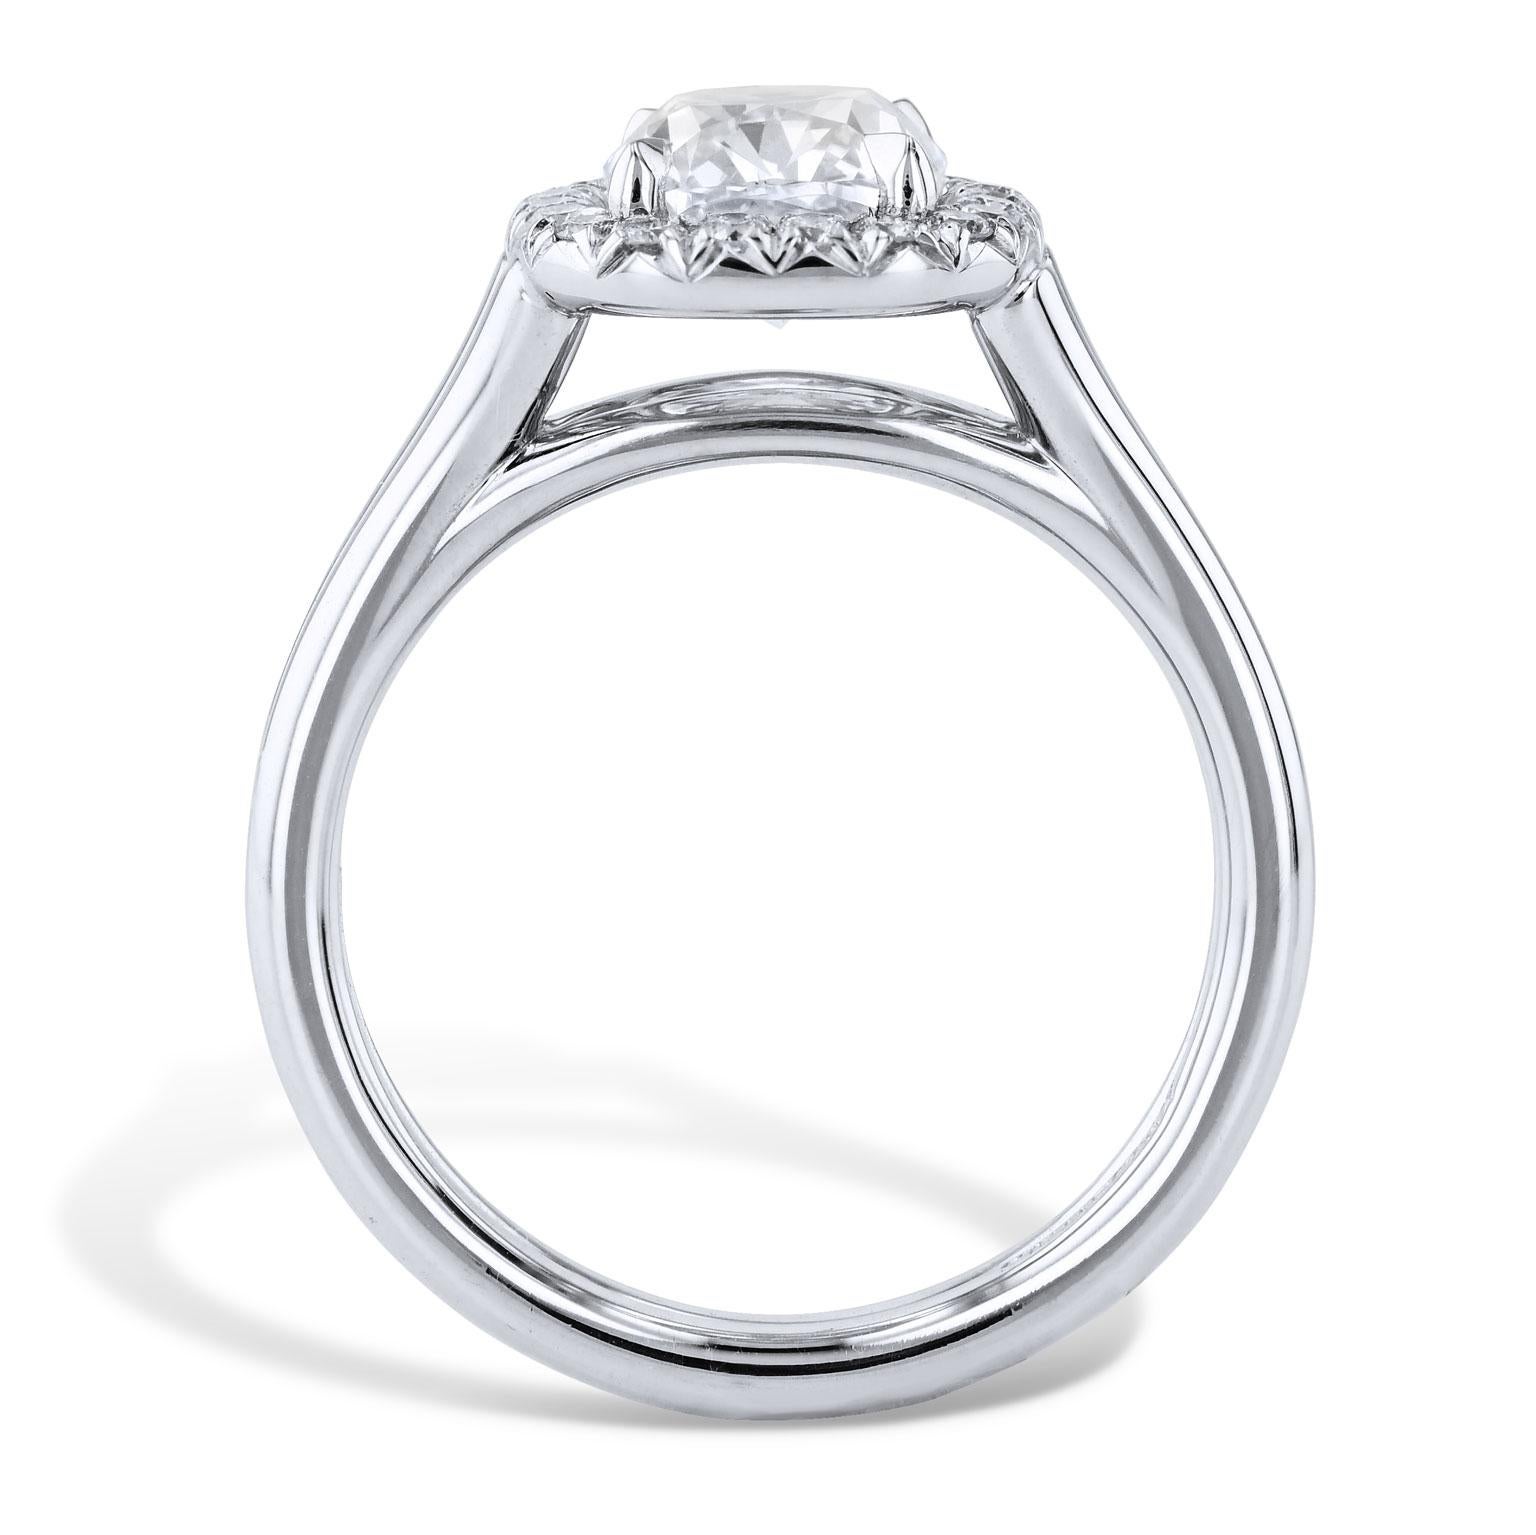 Cushion Cut GIA Certified 2.02 Carat Diamond and Platinum Halo Engagement Ring made by H&H 